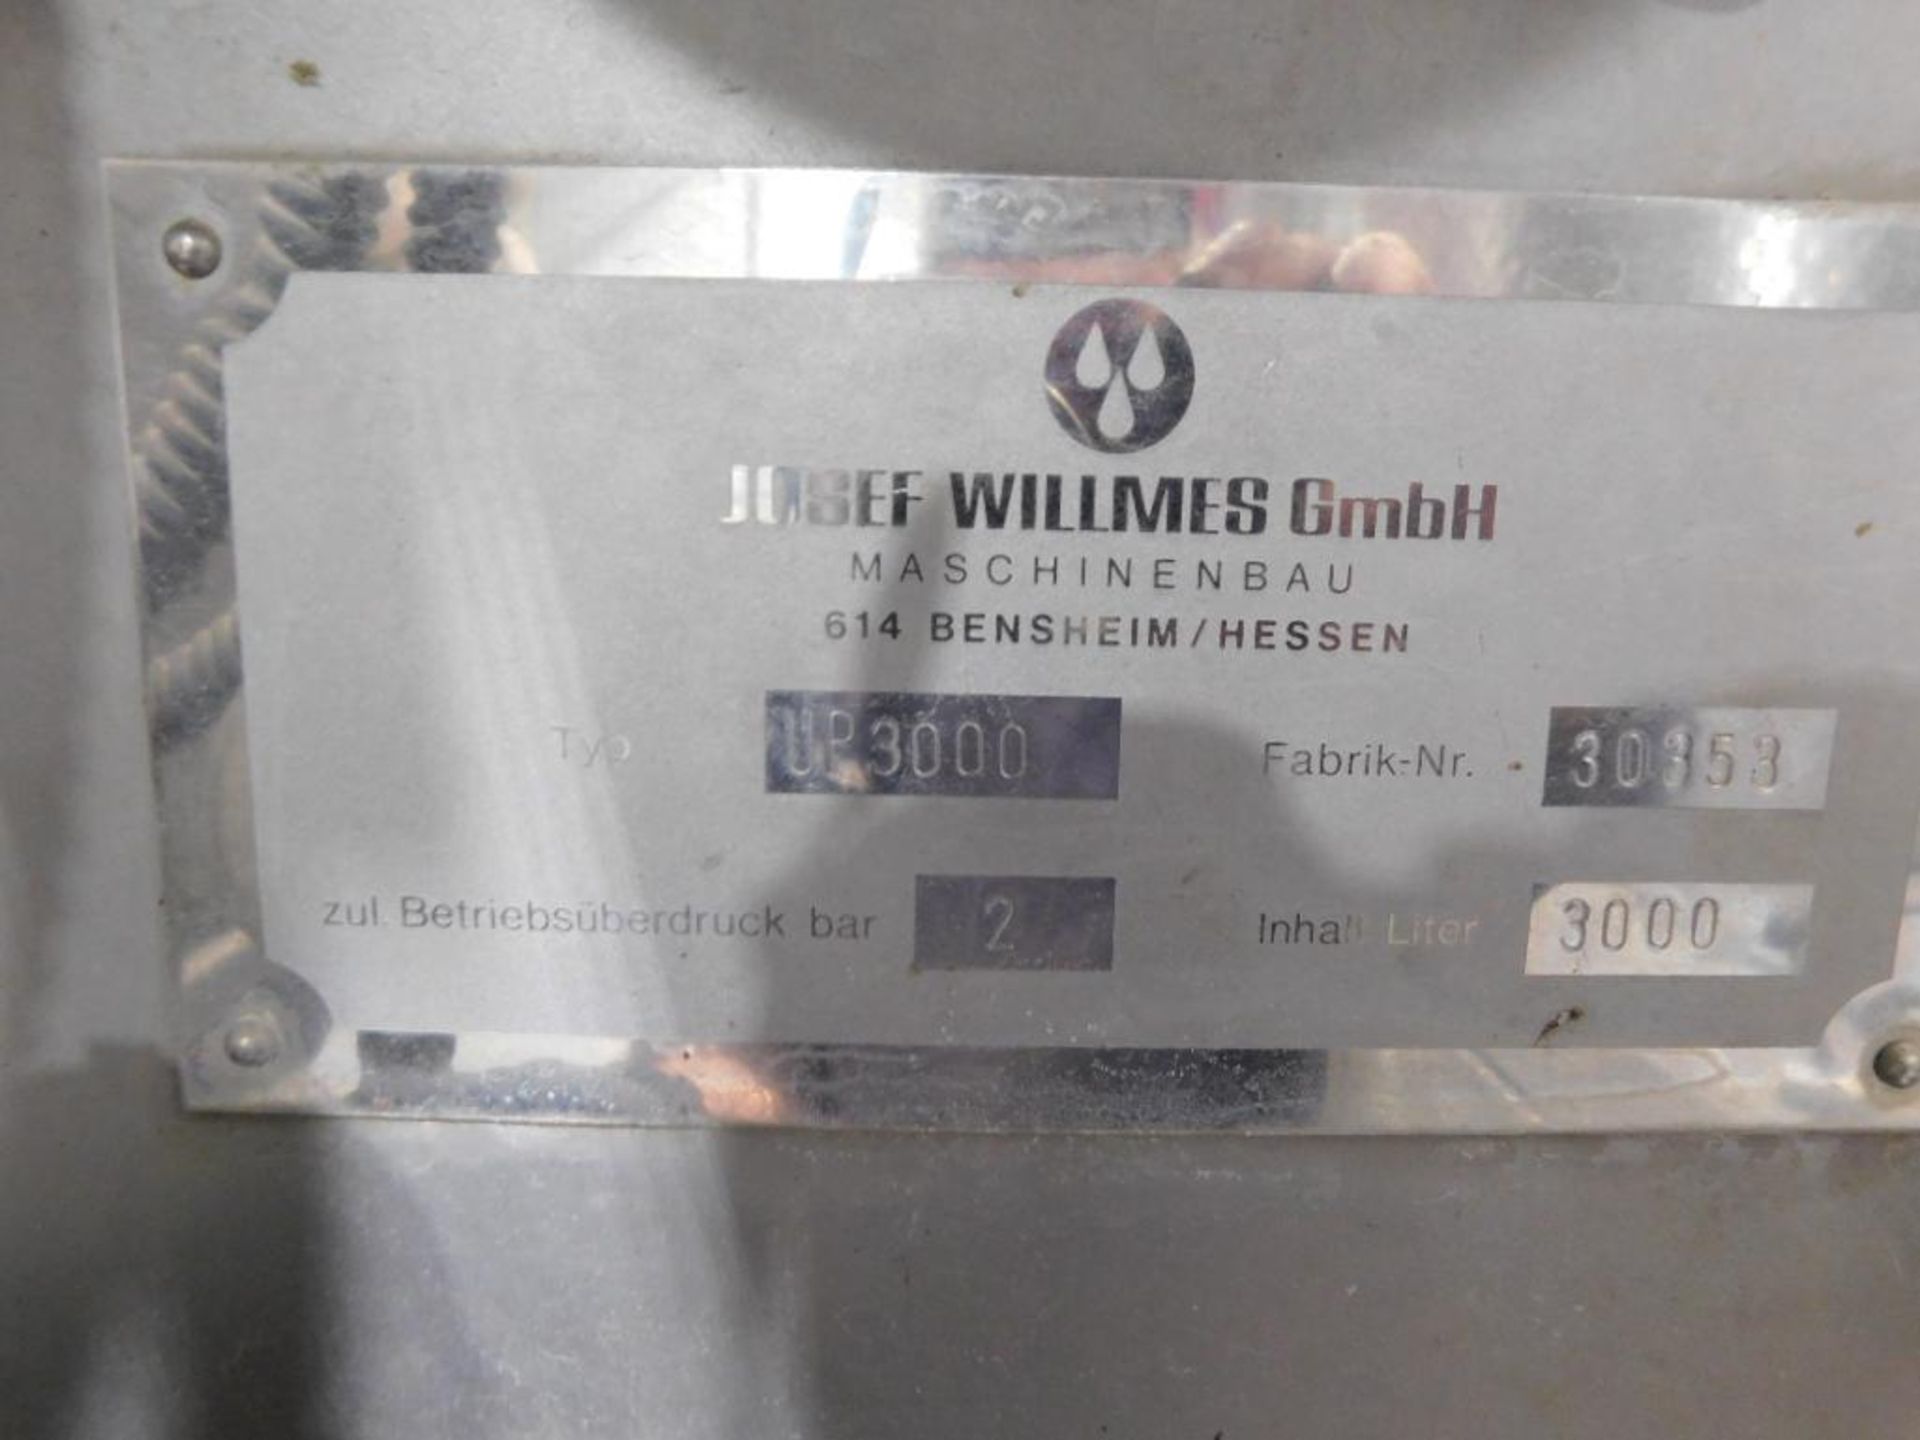 Willmes Merlin UP3000 3000 Liter Press, Full Automatic Control, Stainless Steel, Vertical Juice Drai - Image 6 of 6